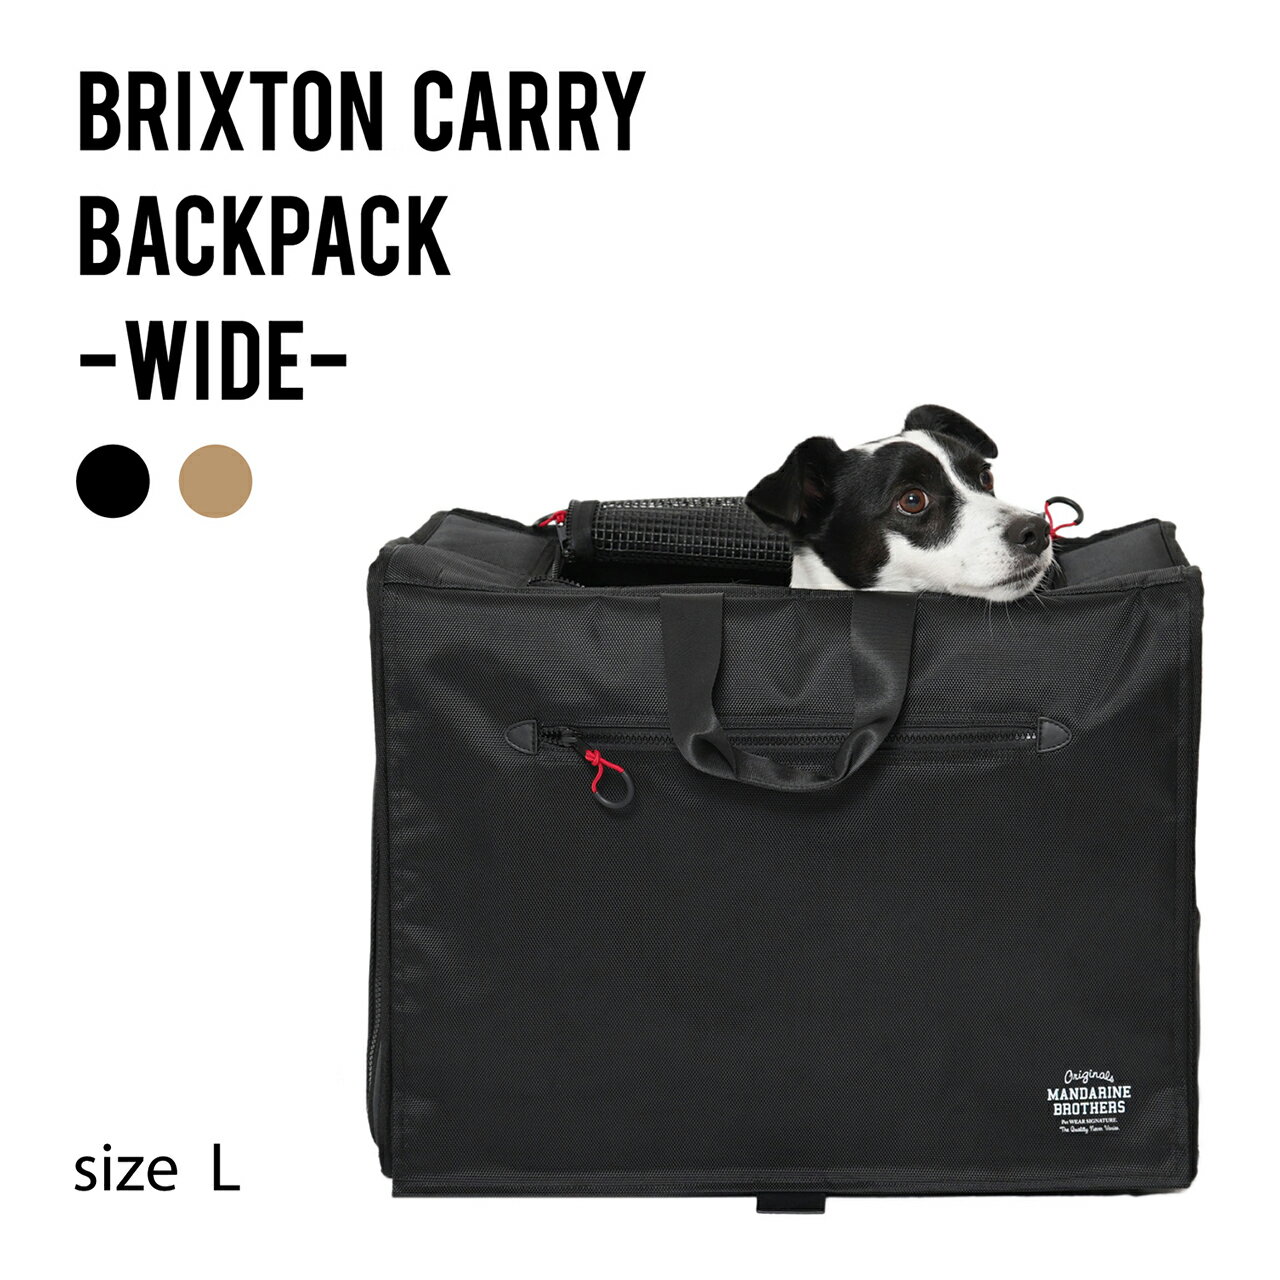 MANDARINE BROTHERS『BRIXTON CARRY BACKPACK WIDE』